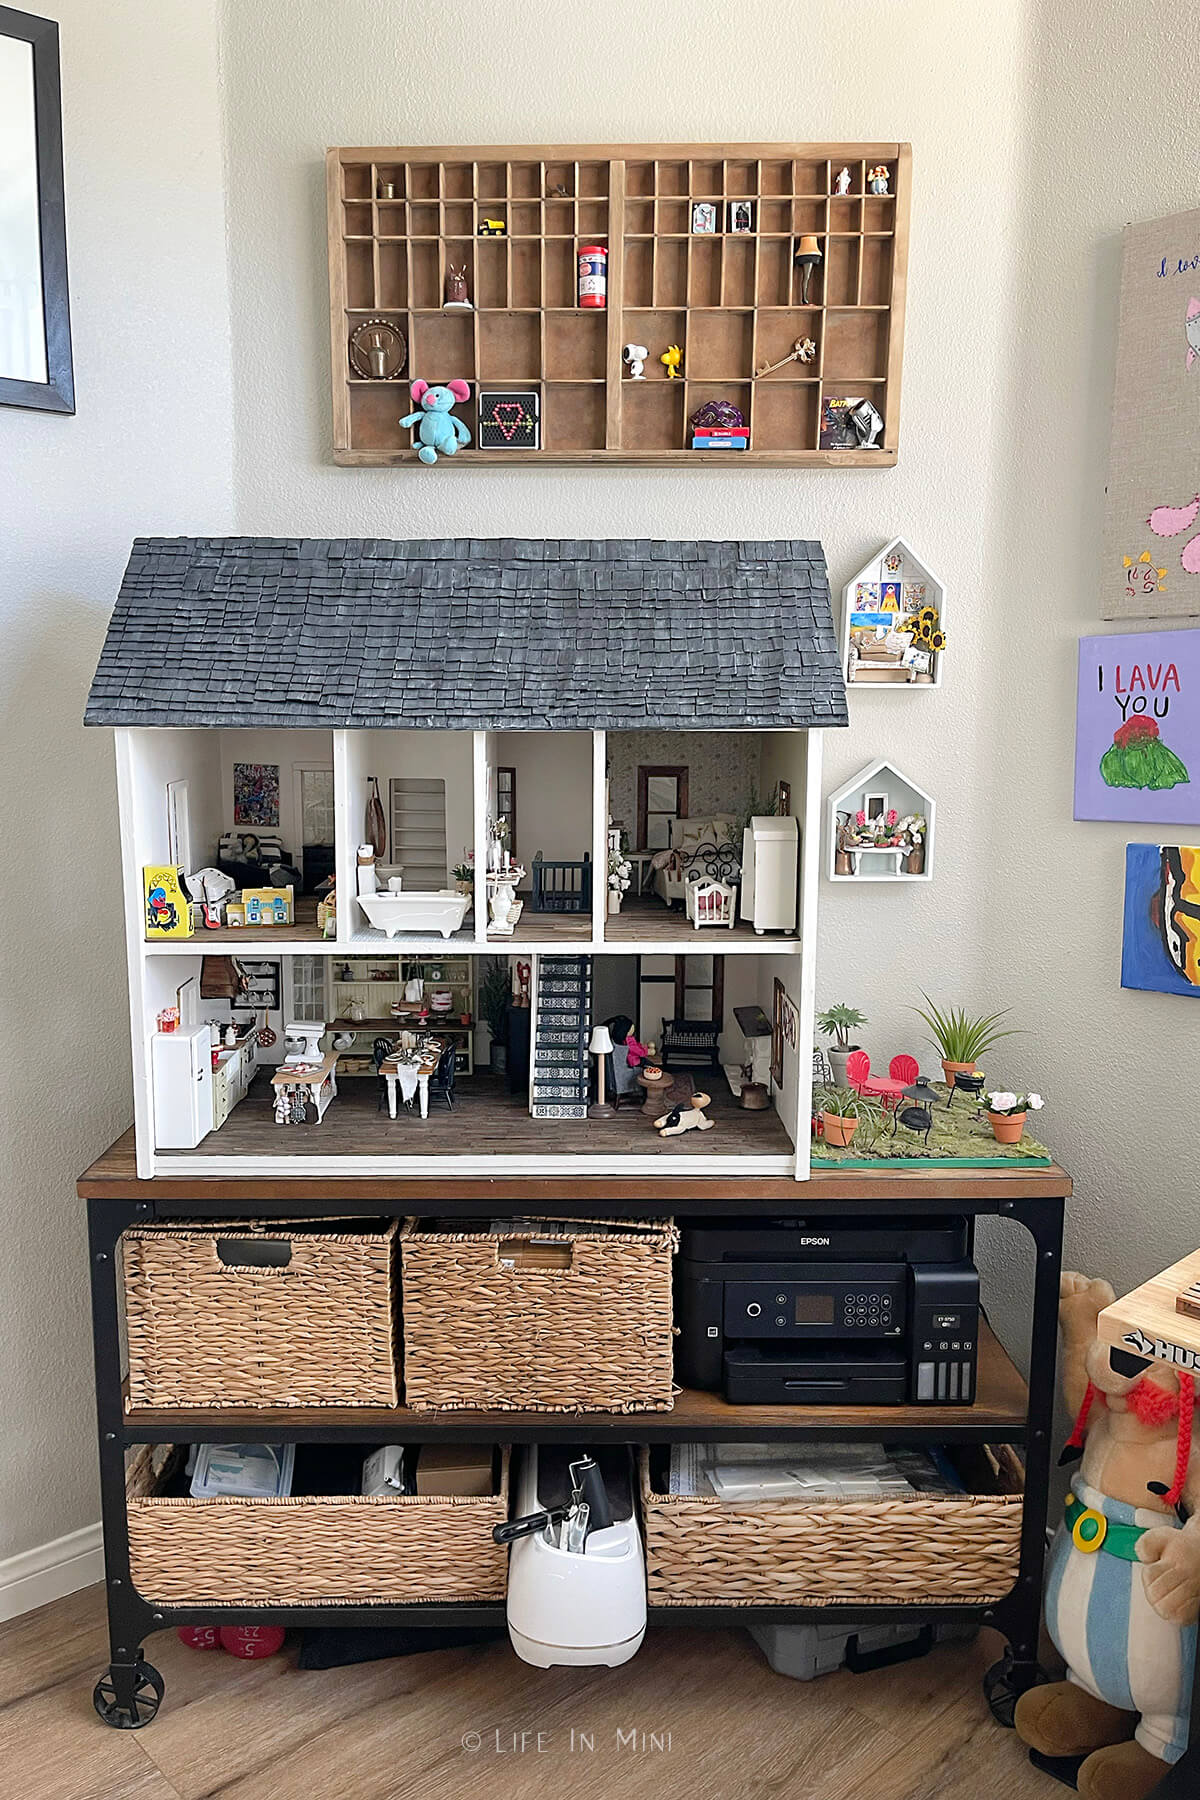 A dollhouse sitting on a rolling cart with baskets in it with a wooden printers drawer hanging over it